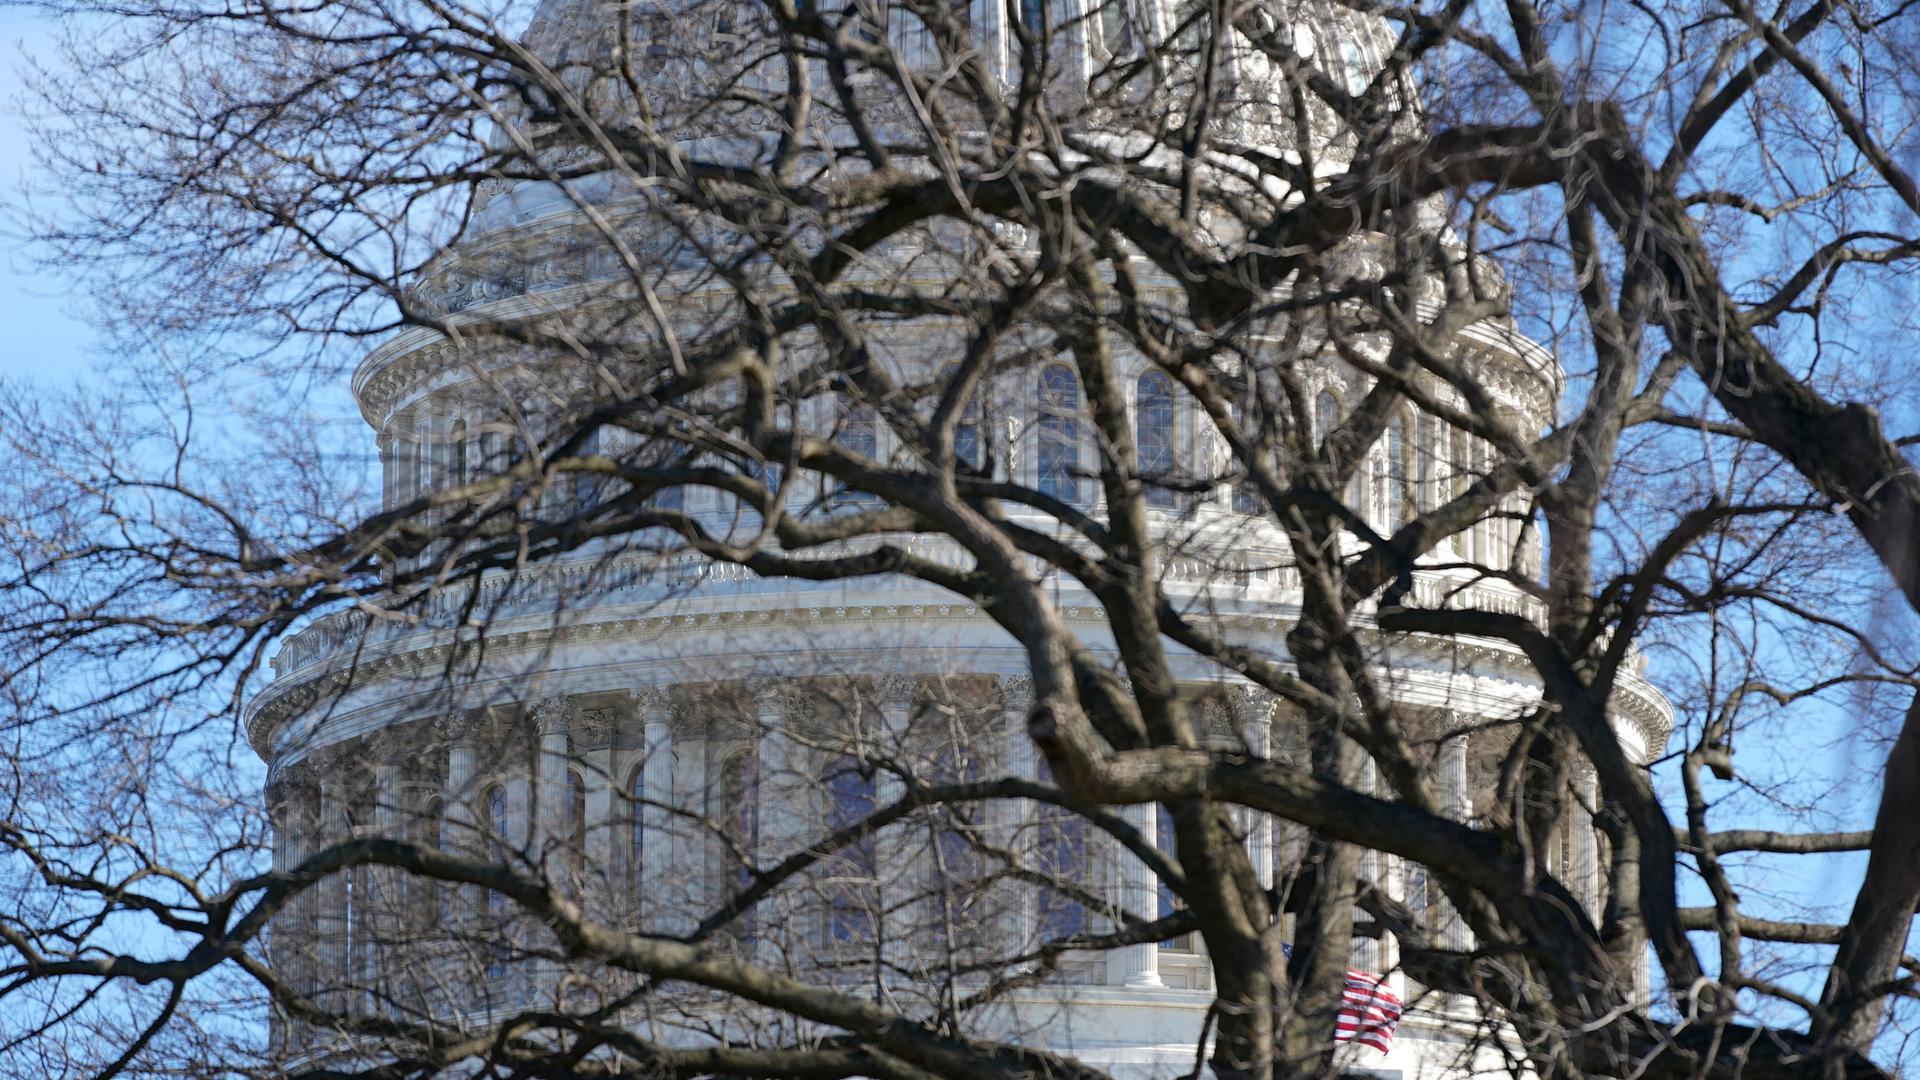 The stone facade of the US Capitol dome is shown in the distance through the branches of a tree without leaves.